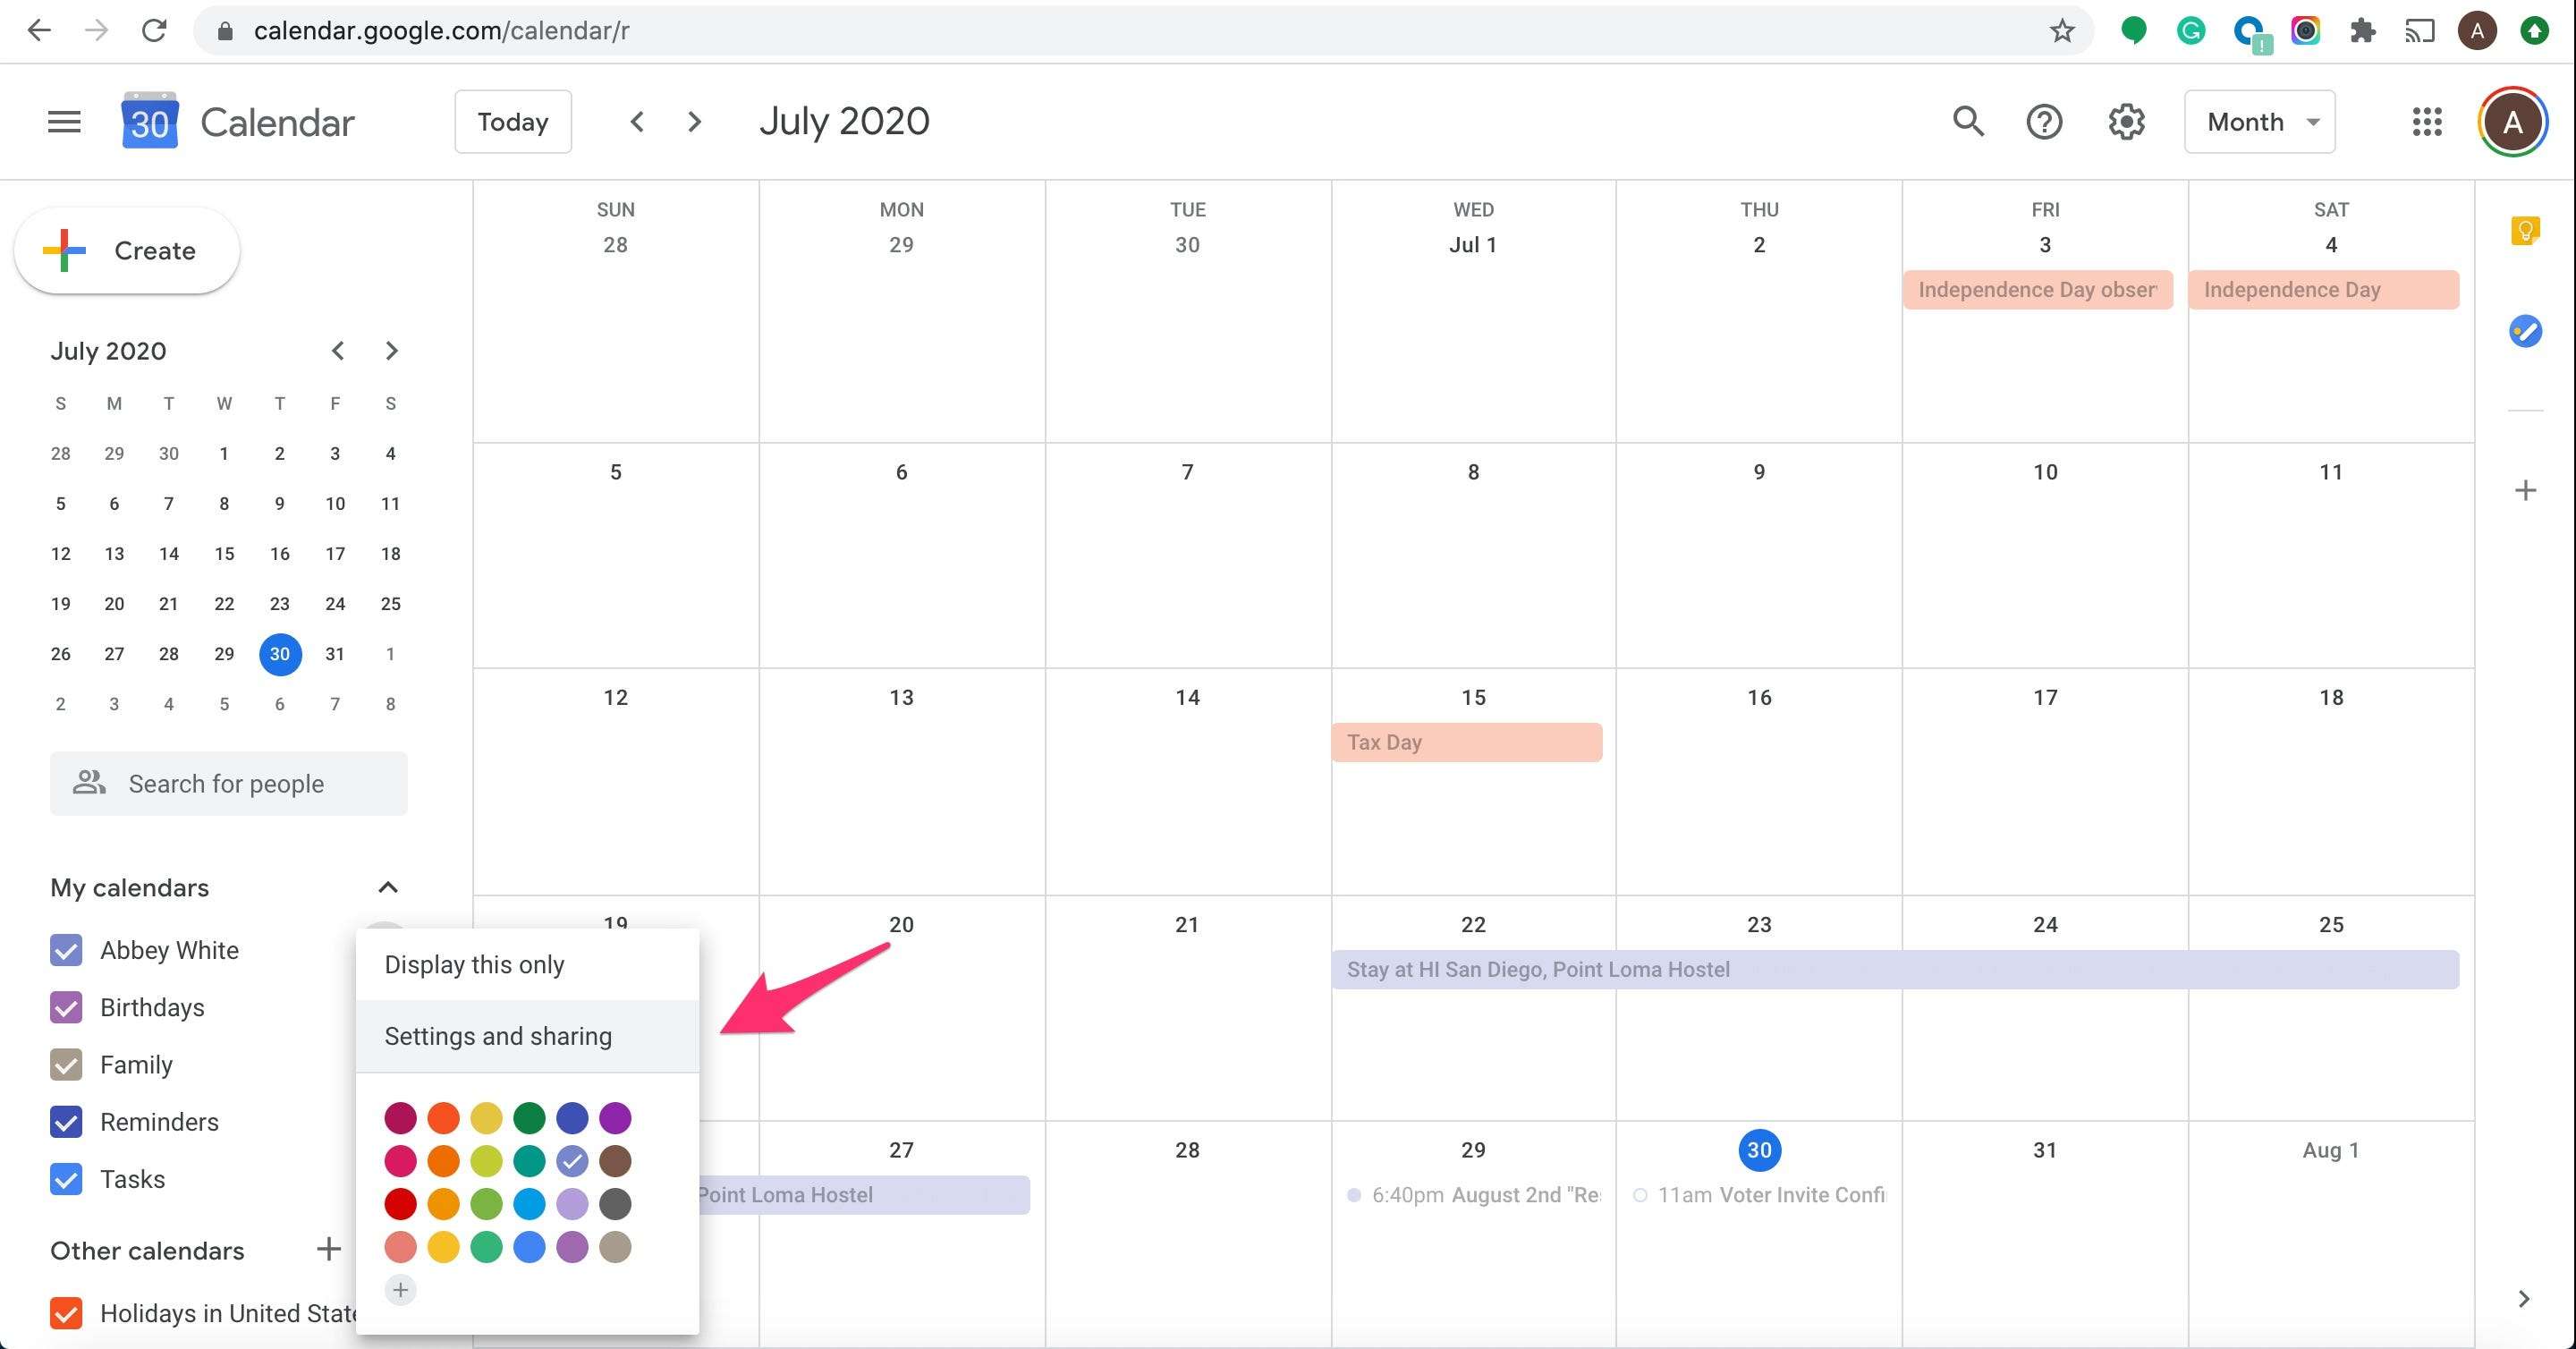 How to sync your Google Calendar with Outlook on a PC, Mac computer, or